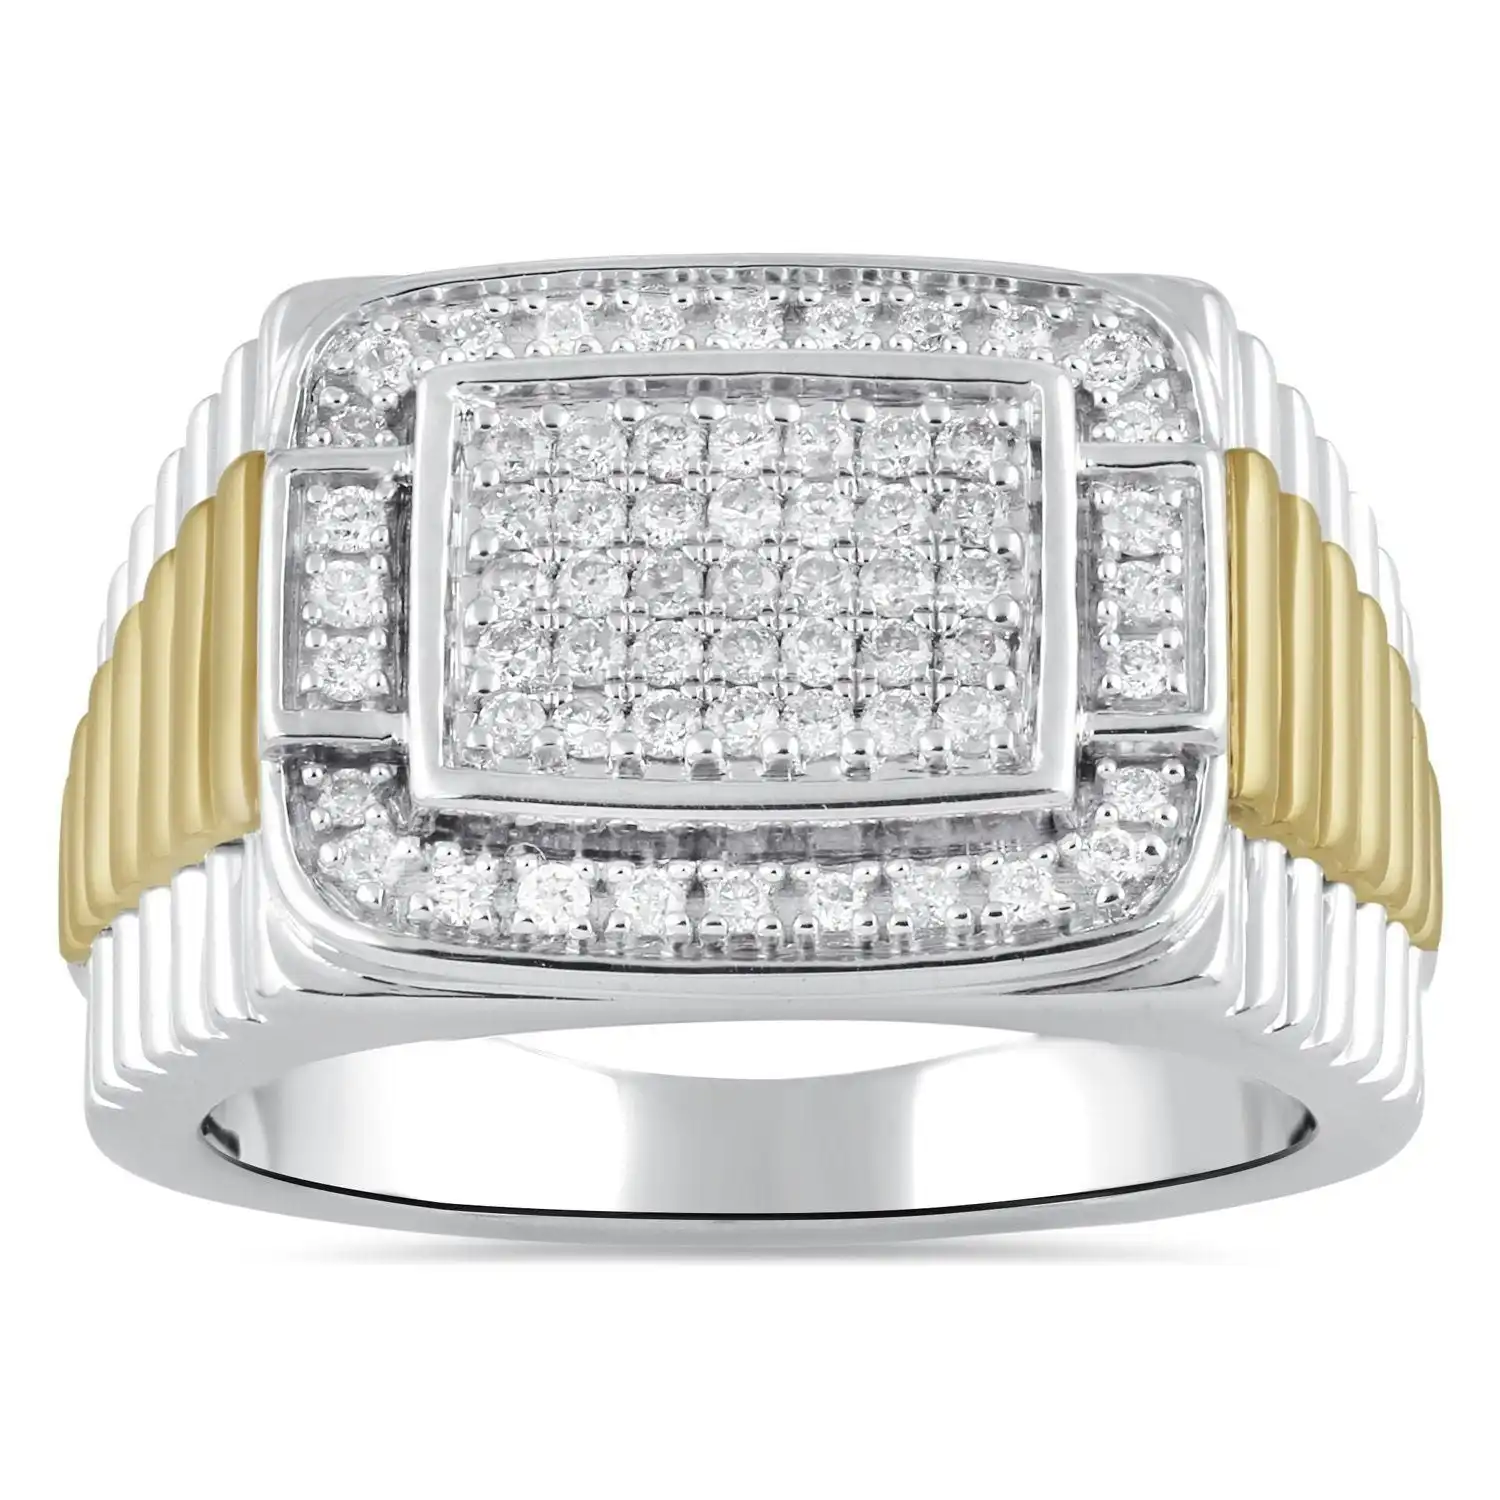 Men's Ring with 1/2ct of Diamonds in 9ct Yellow Gold and Sterling Silver